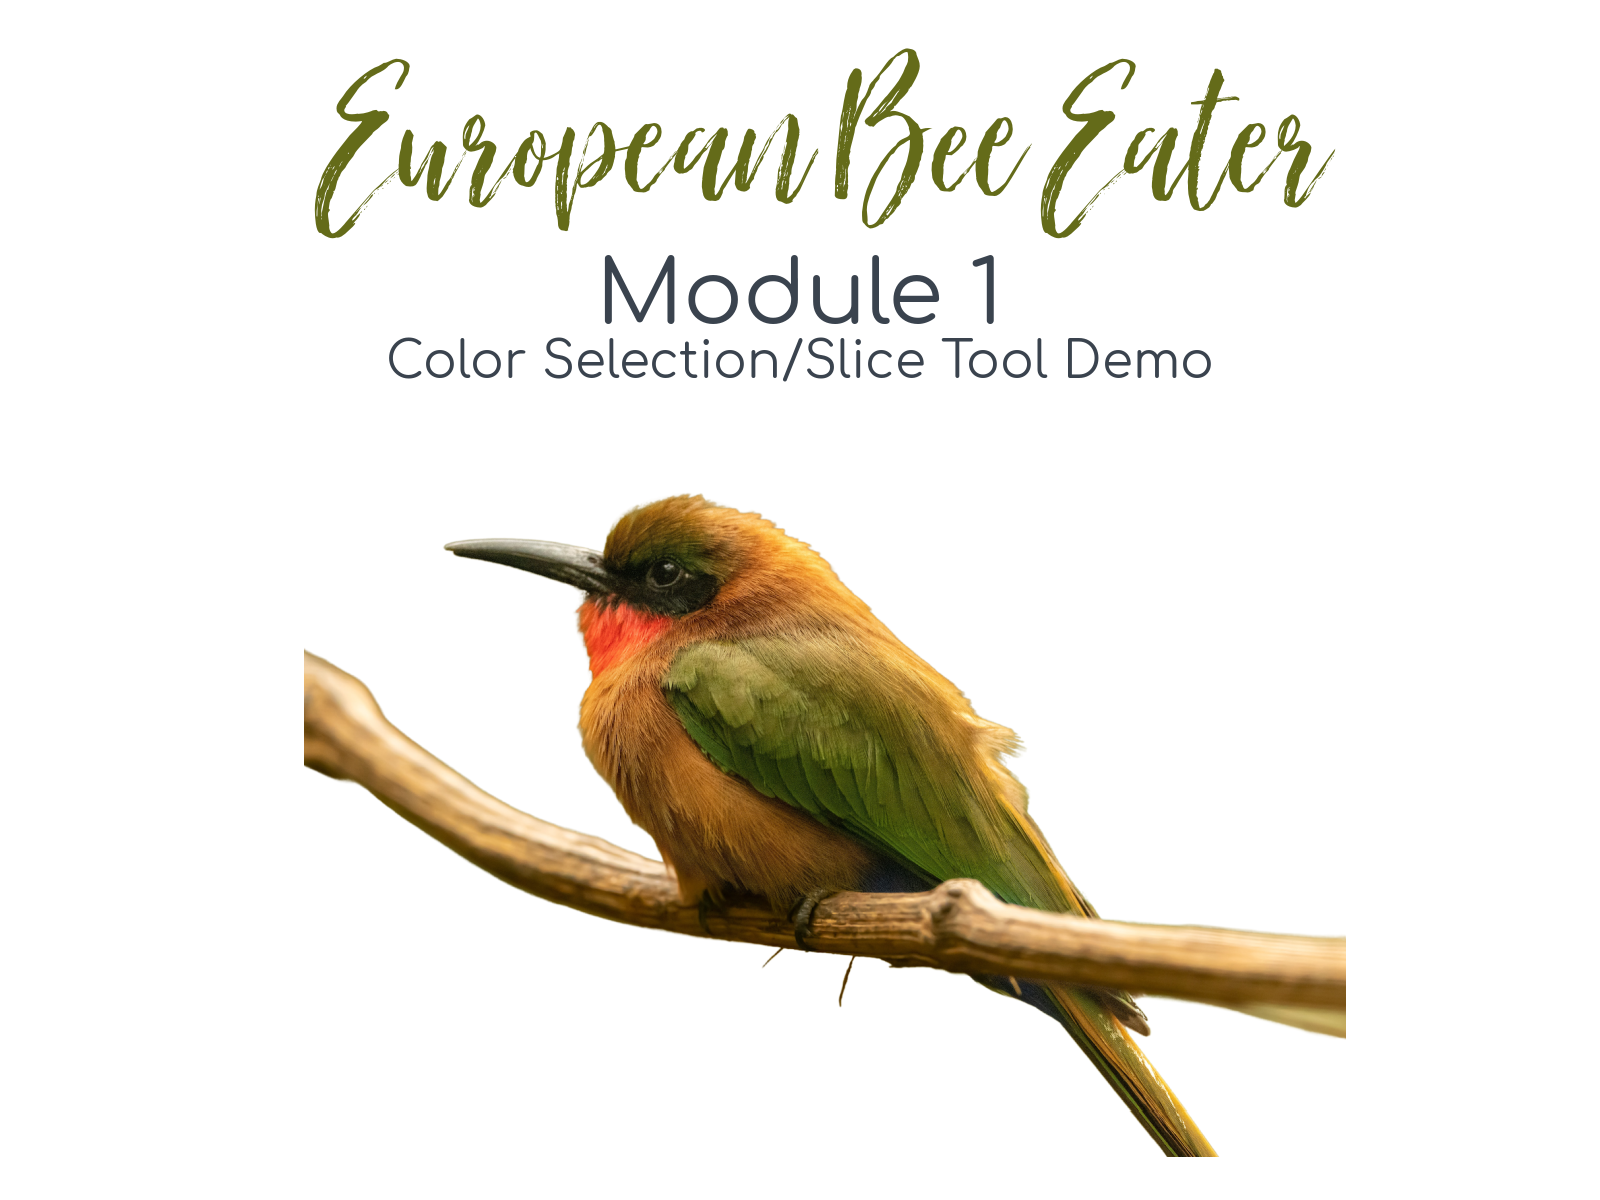 Link to Colored Pencil Drawing Tutorial of an European Bee Eater